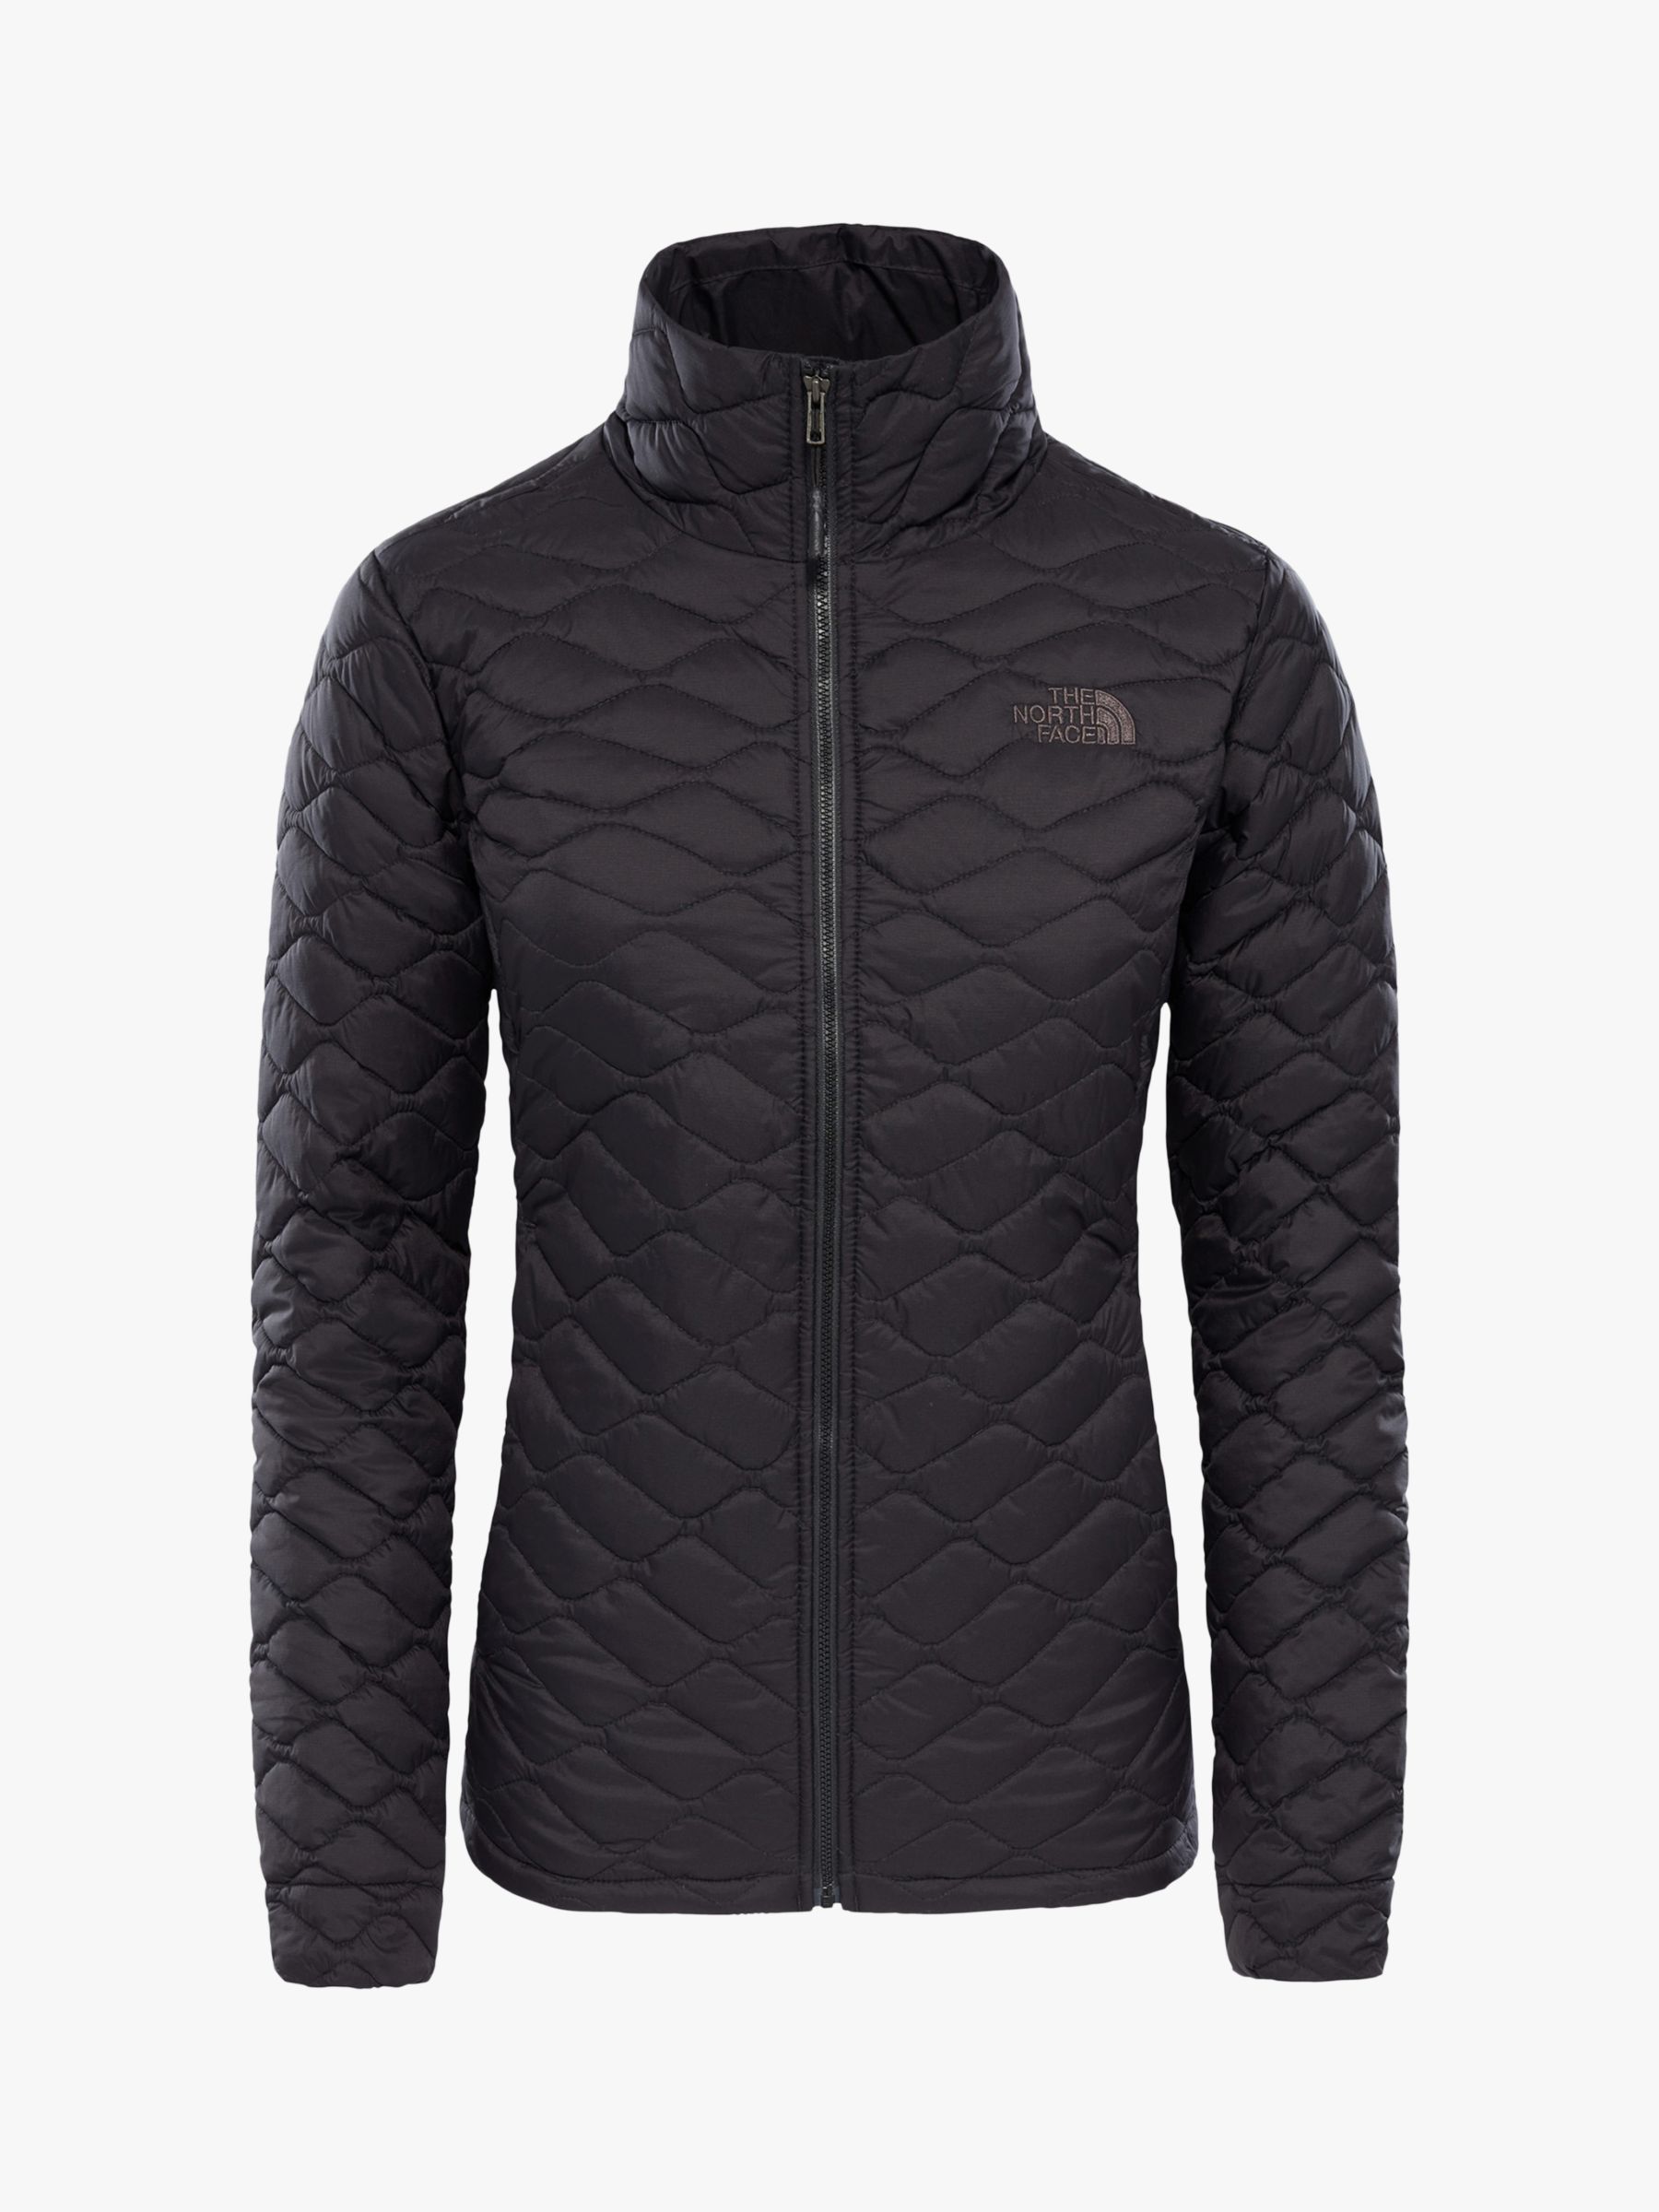 north face women's black quilted jacket